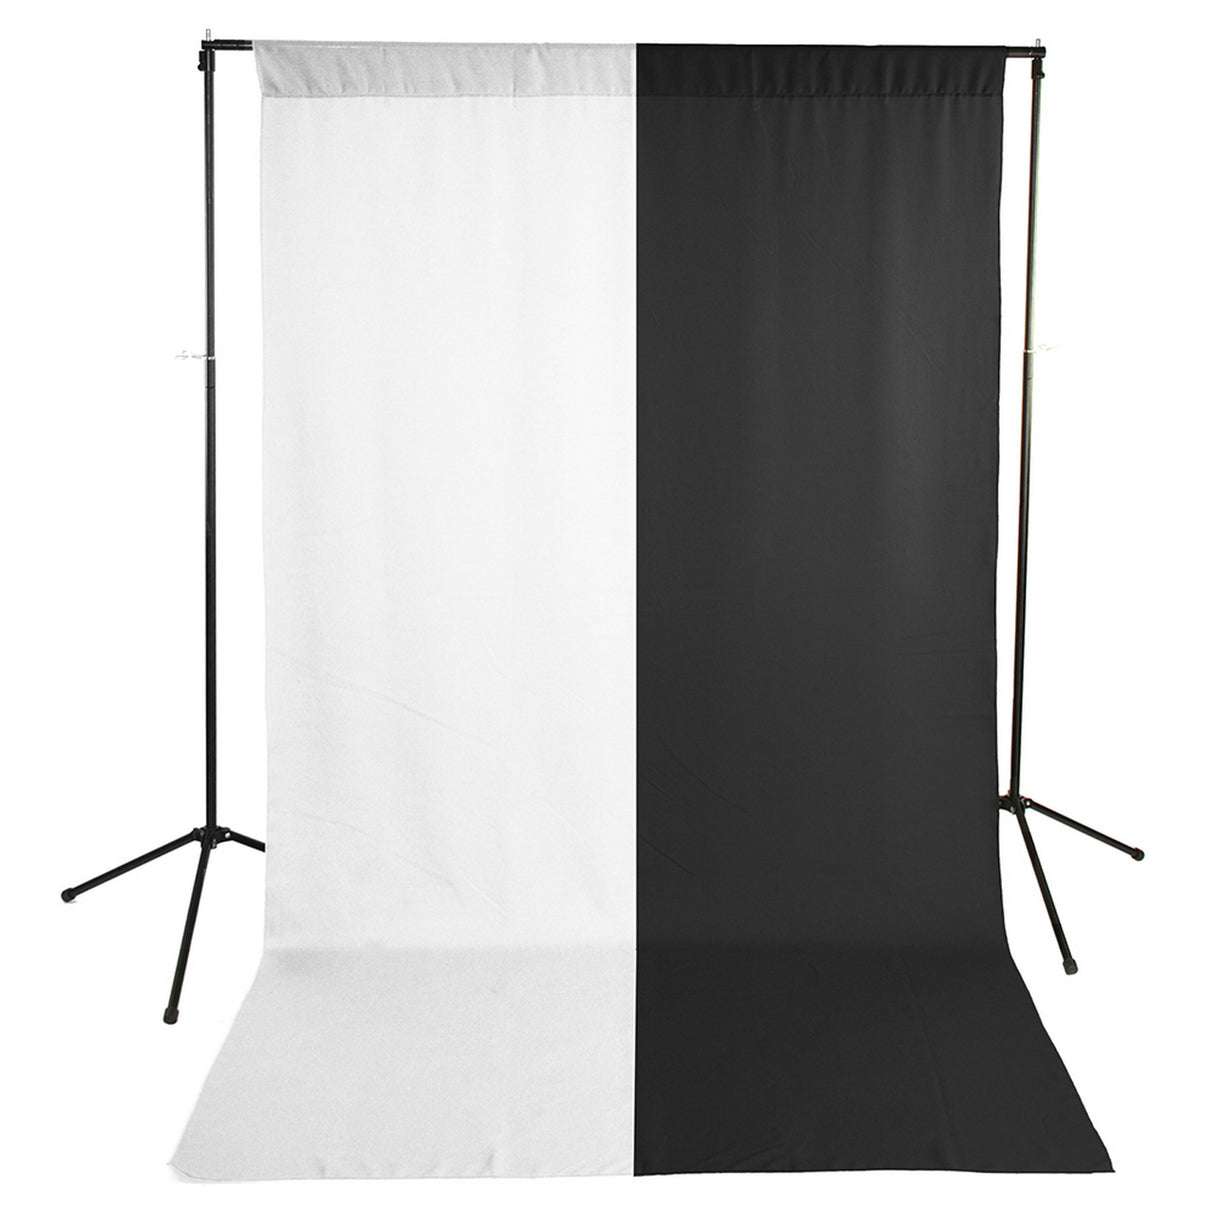 Savage 59-990120 5 x 9-Foot Wrinkle-Resistant Polyester Background Economy Stand Kit, White/Black